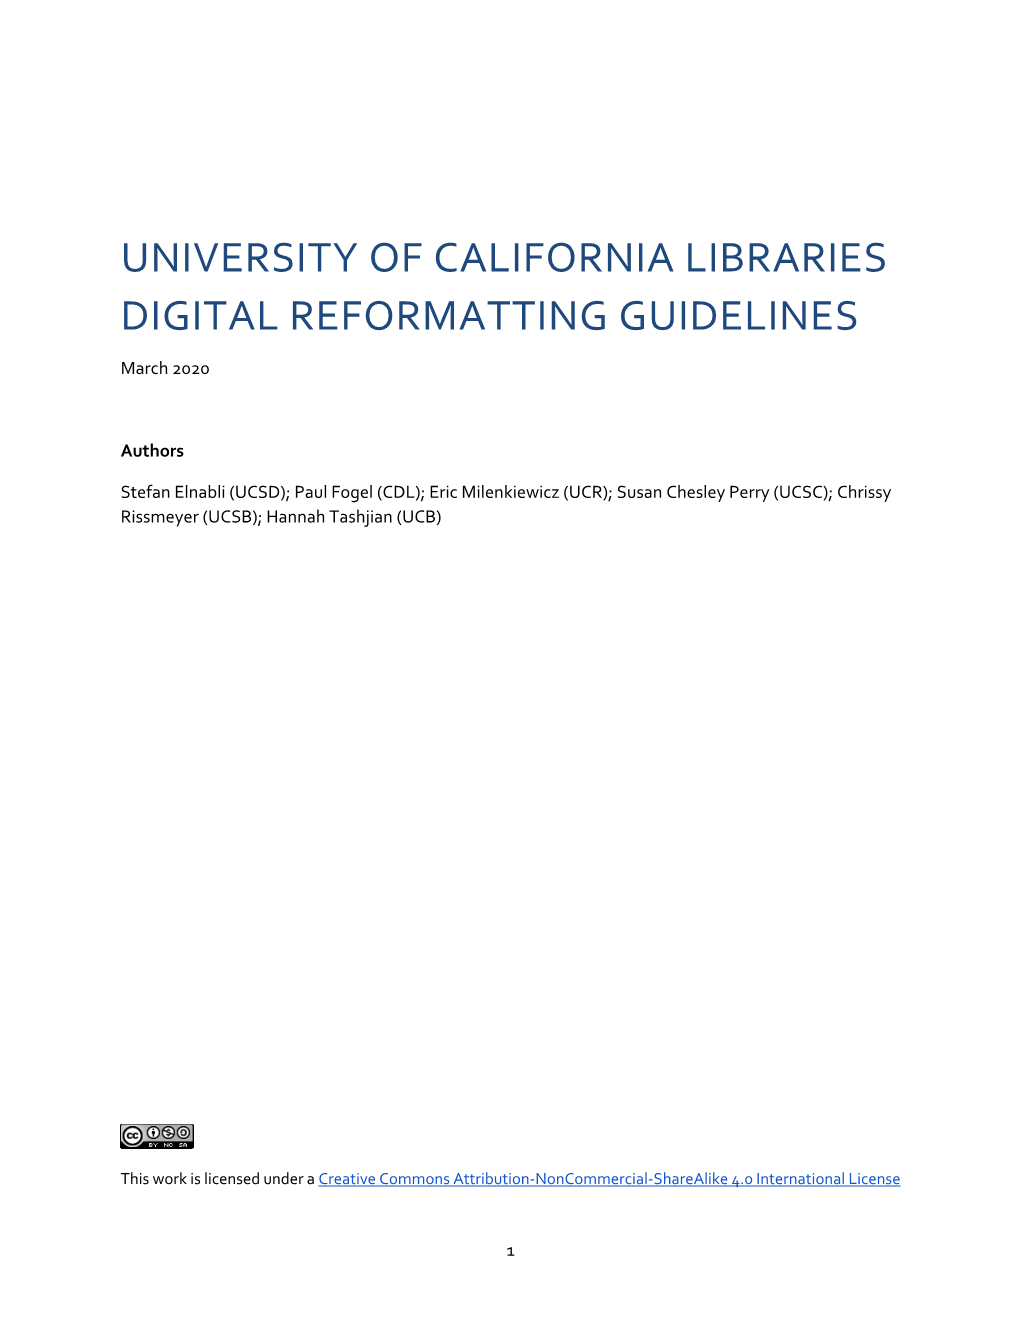 University of California Digital Reformatting Guidelines (UCDRG) Is an Update to the 2011 CDL Digital File Format Recommendations: Master Production Files (CDL DFFR)